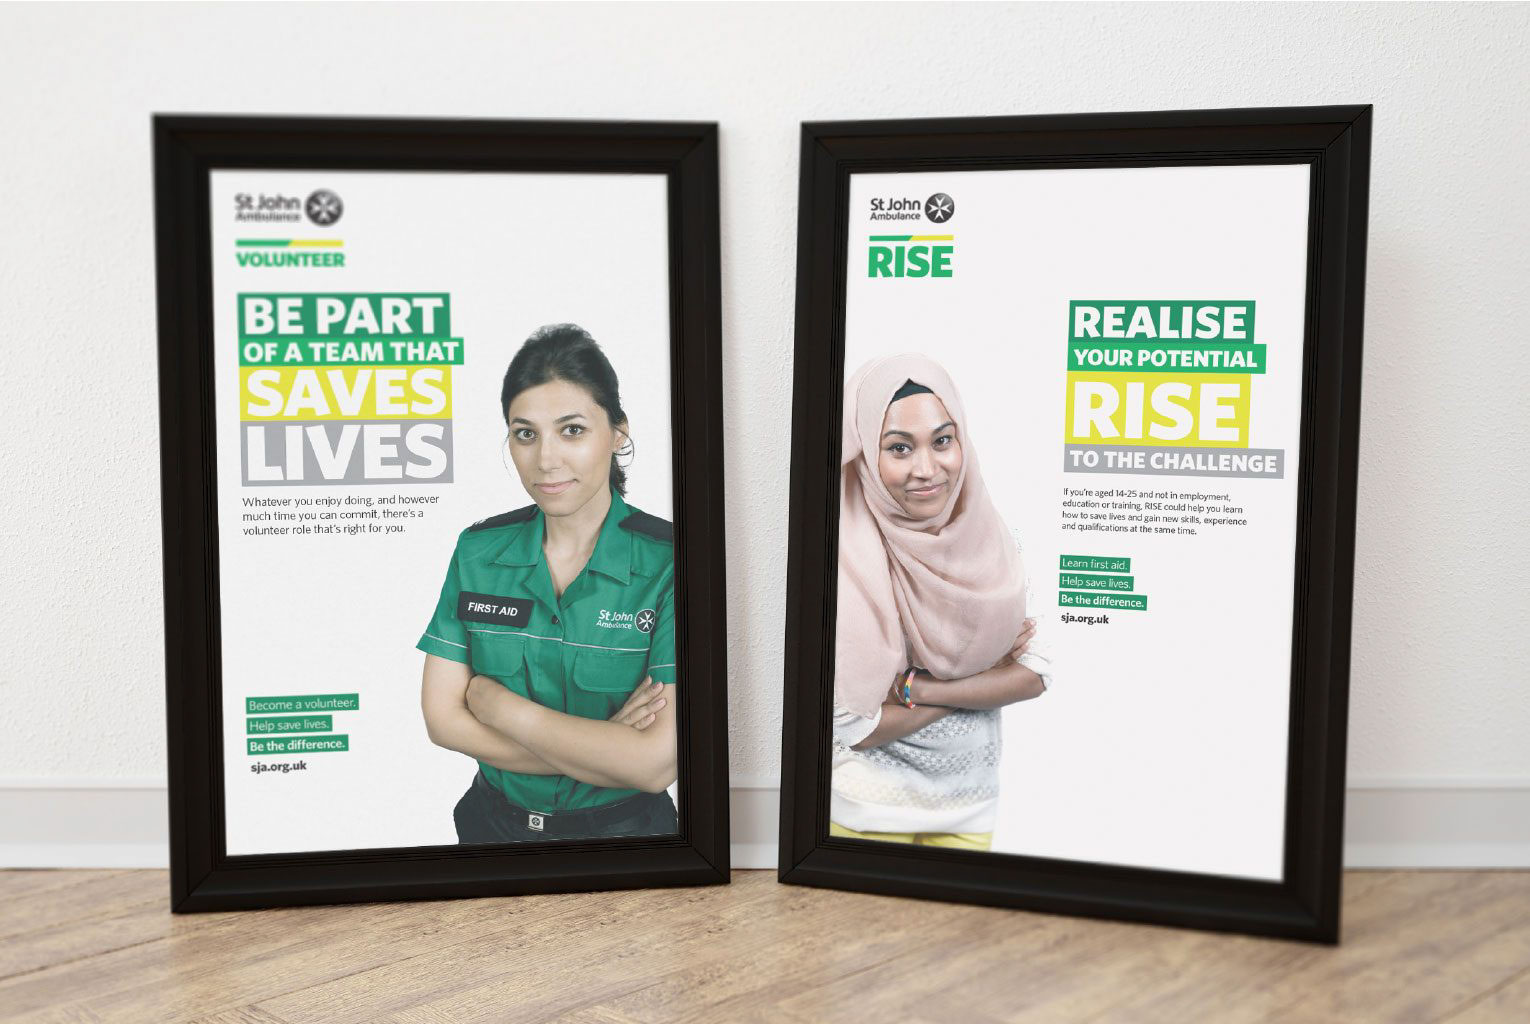 Image showing posters using the new brand identity